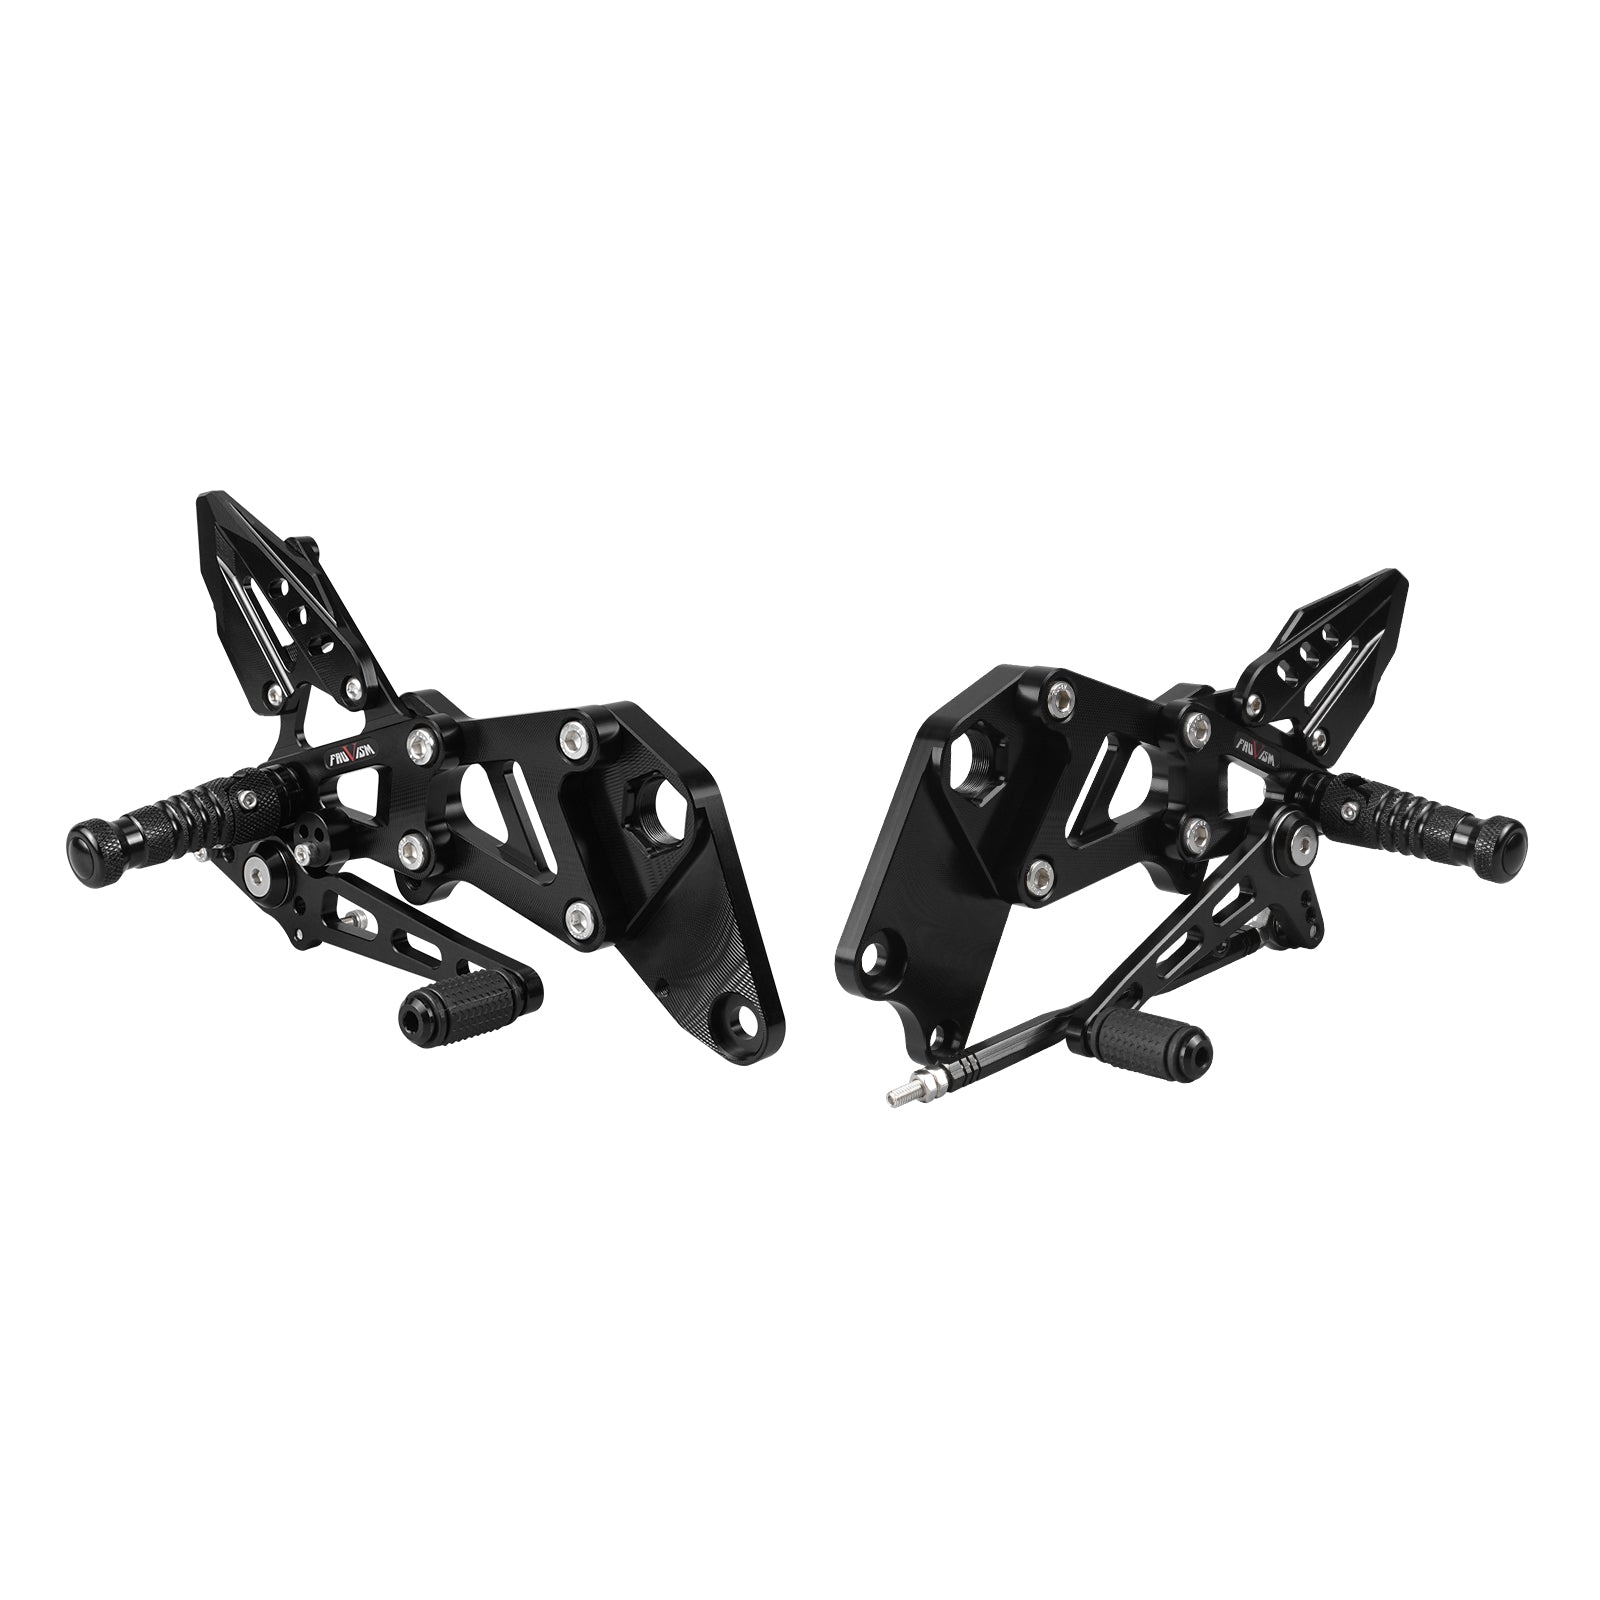 Rearset Racing Footrest Foot Pegs For KTM RC 390 2022-2023